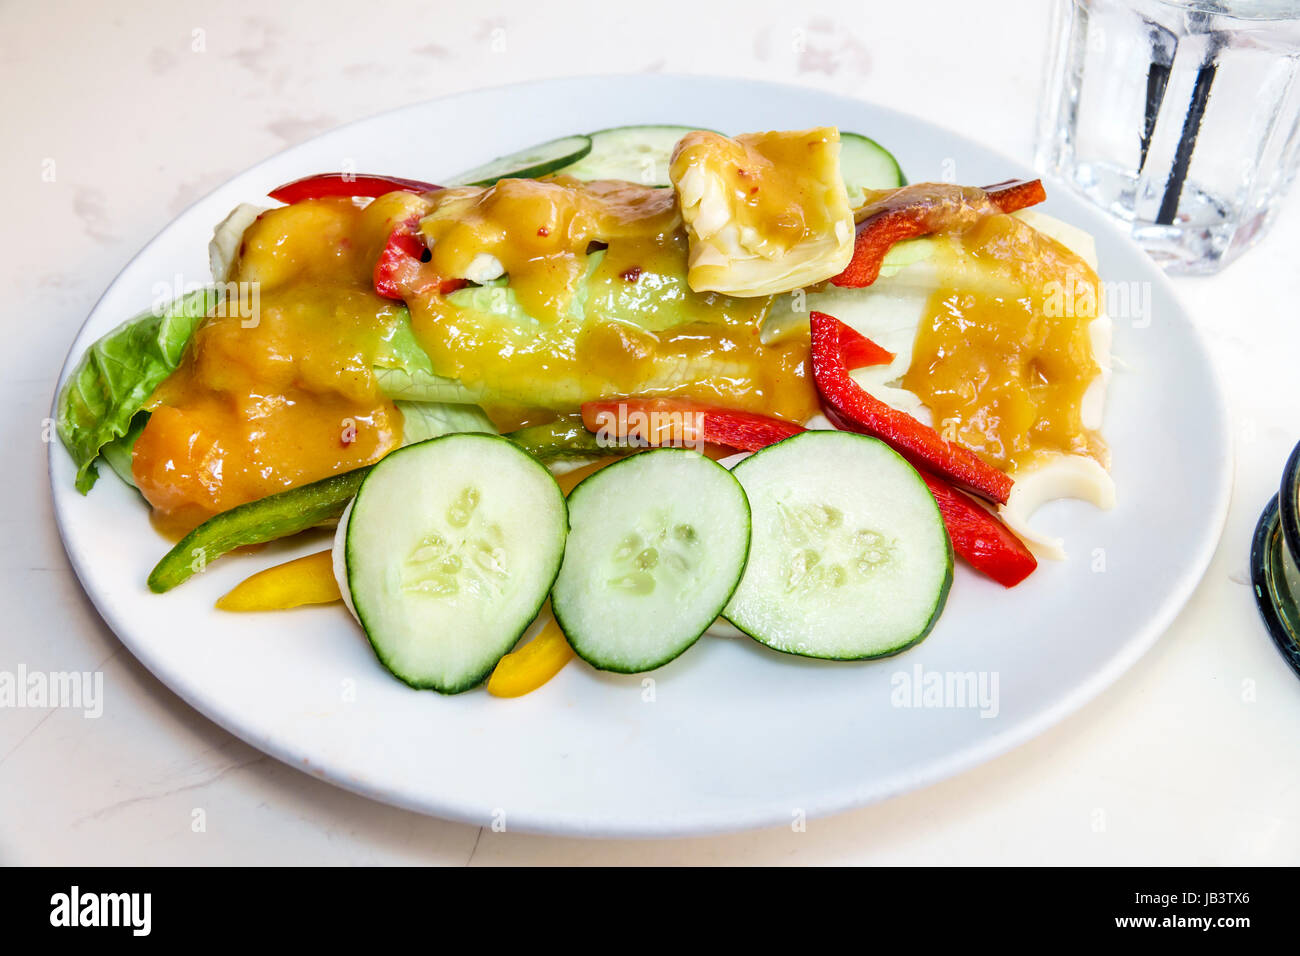 Miami Beach Florida,Front Porch Cafe,restaurant restaurants food dining cafe cafes,dining,salad,dressing,cucumber,food,plate,FL170401006 Stock Photo